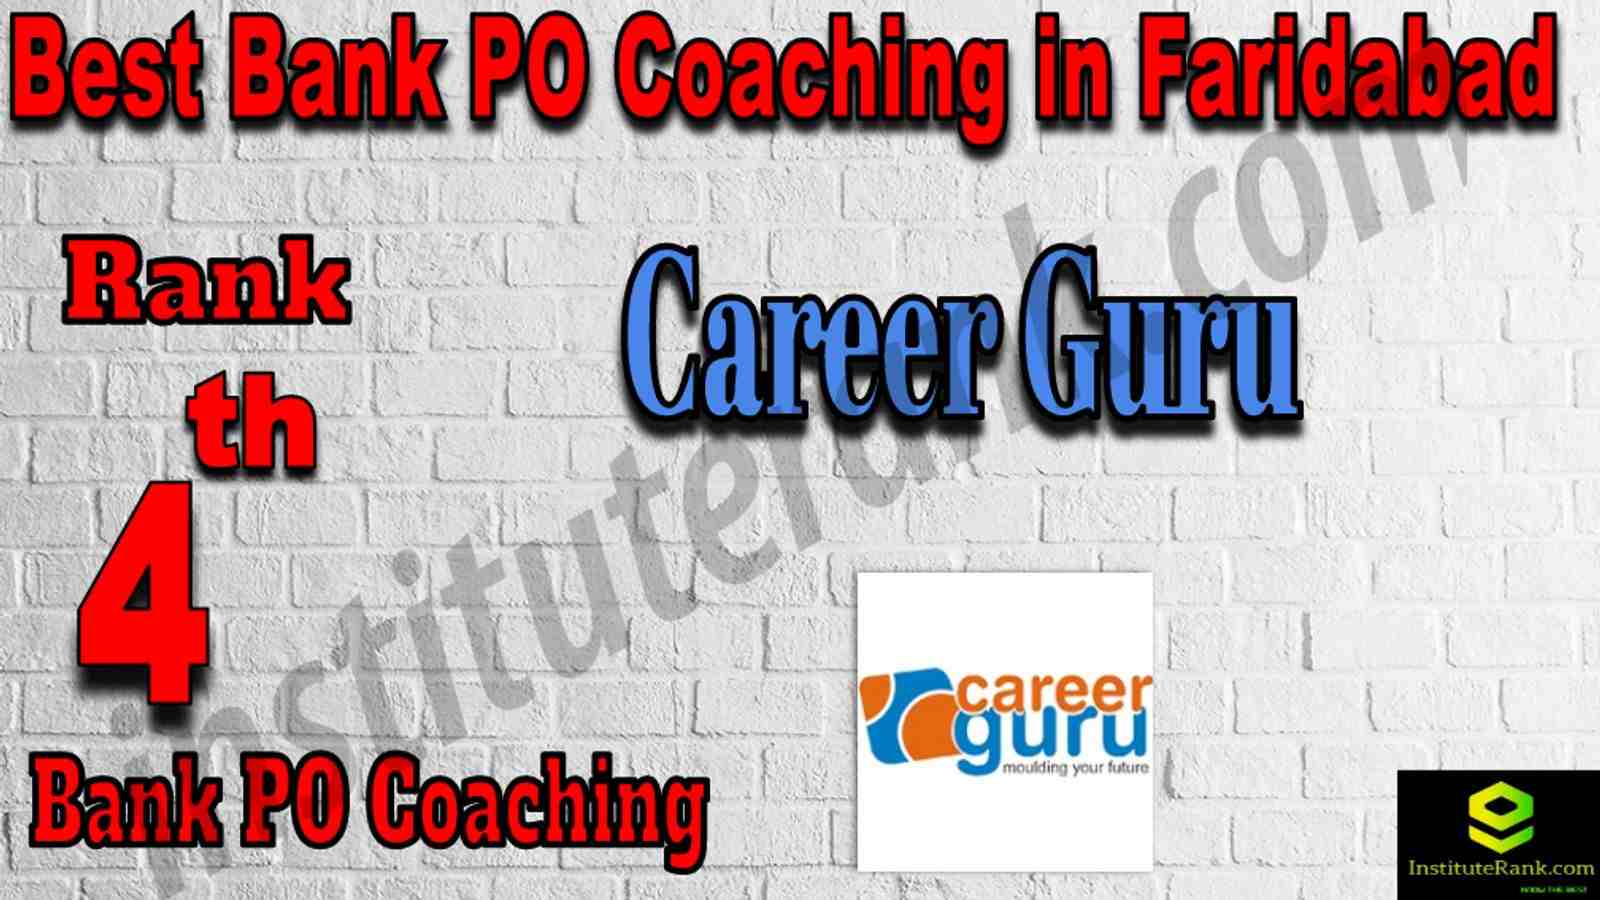 4th Best Bank PO Coaching in Faridabad